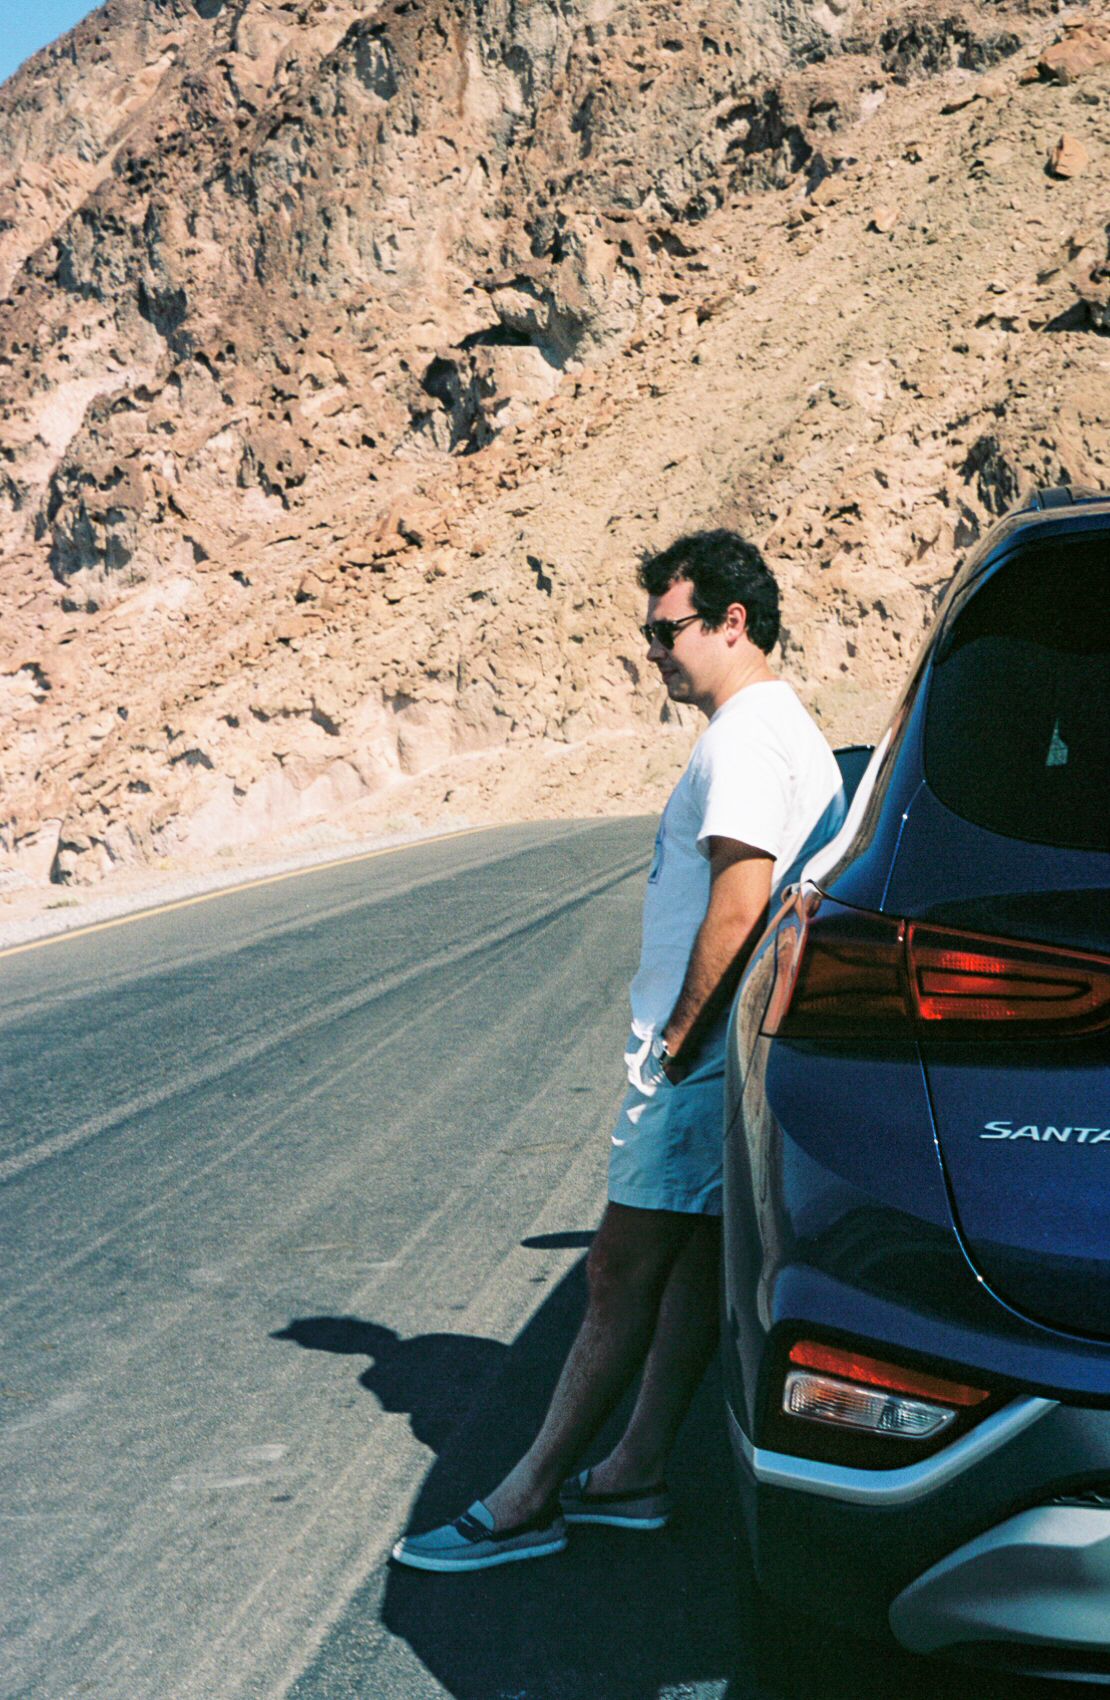 A man wearing a white t-shirt and sunglasses leans on a car on the side of the road in Death Valley.